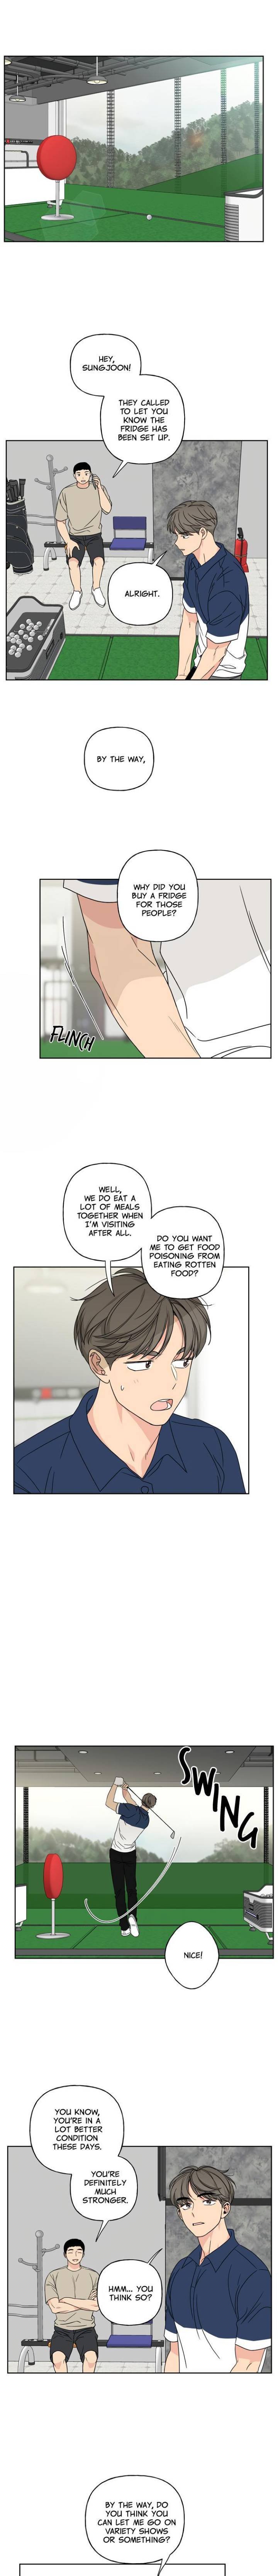 mother-im-sorry-chap-22-10